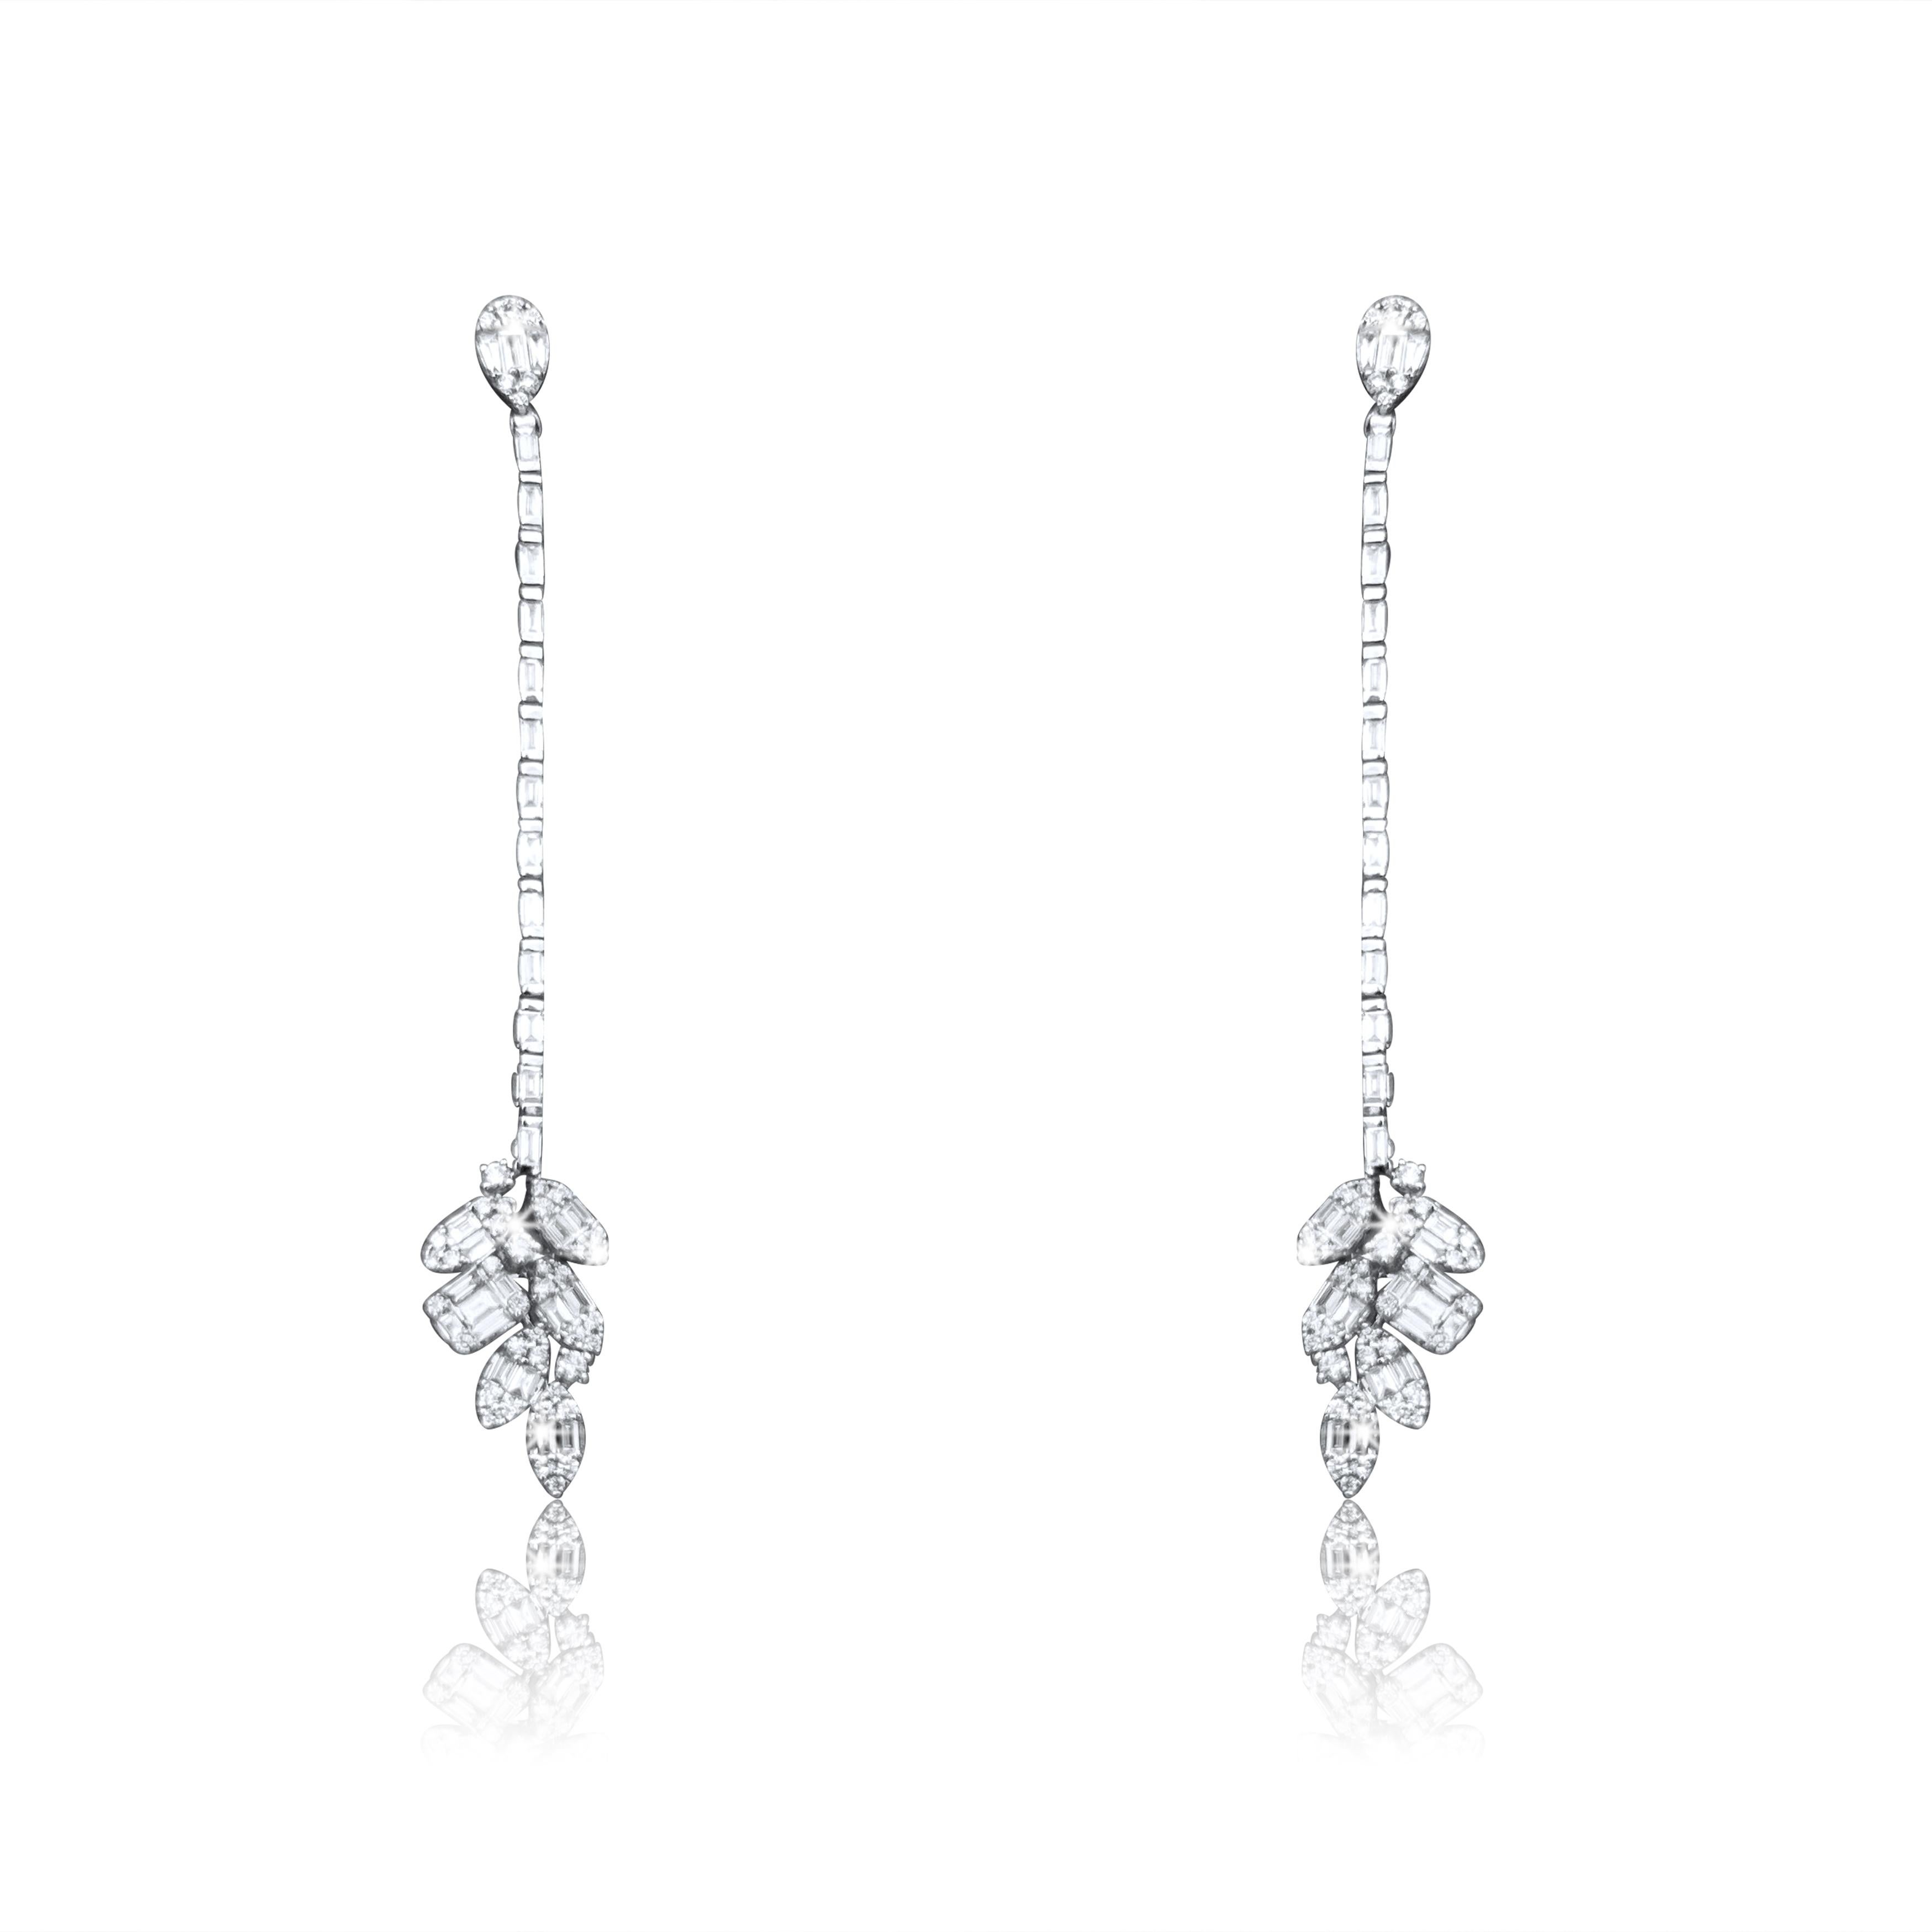 Earring Information
Metal Purity : 18K
Color : White Gold
Gold Weight : 10.50g
Overall Measurement : 3''
Diamond Count : 86 Round Diamonds
Round Diamond Carat Weight : 0.88 ttcw
Baguette Diamonds Count : 60
Baguette Diamonds Carat Weight : 1.63